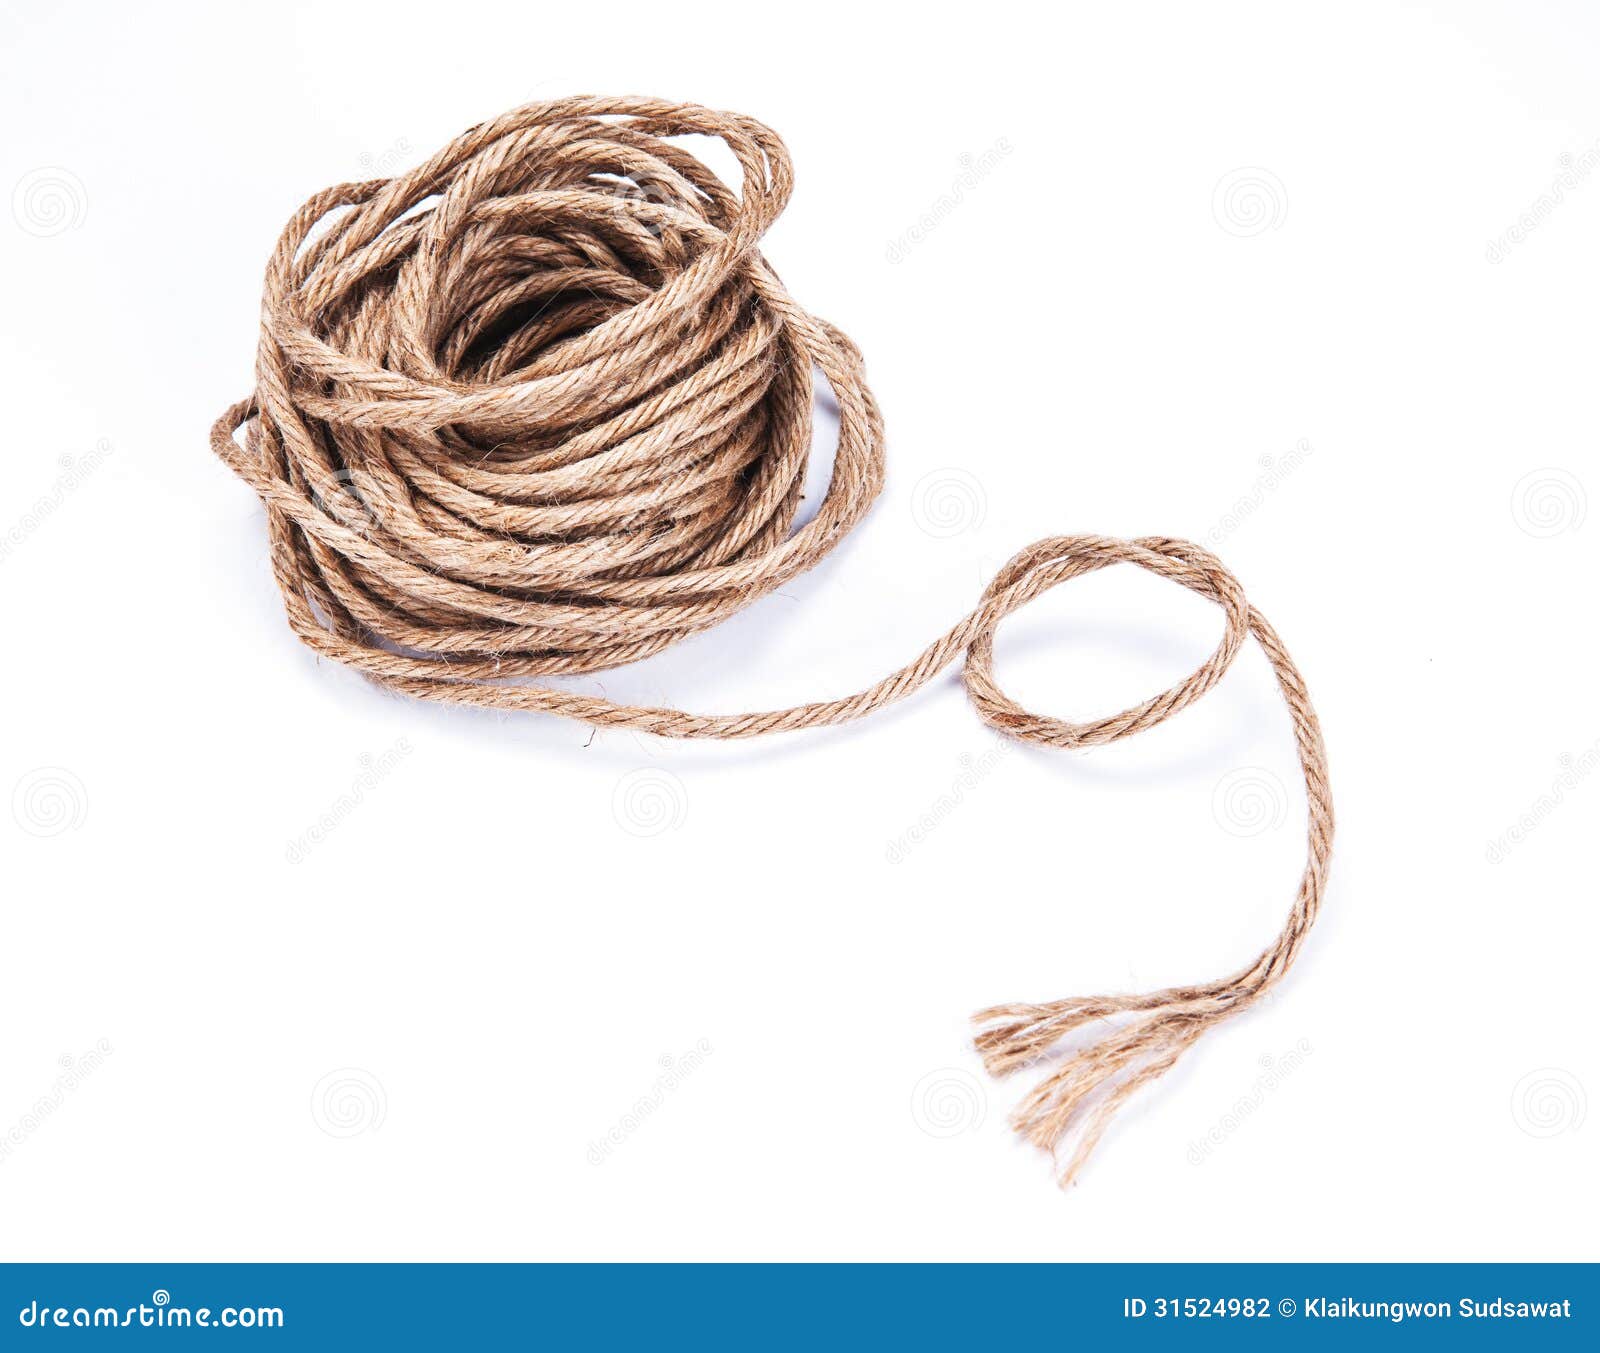 Small Rope Coiled on White Background Stock Photo - Image of stack